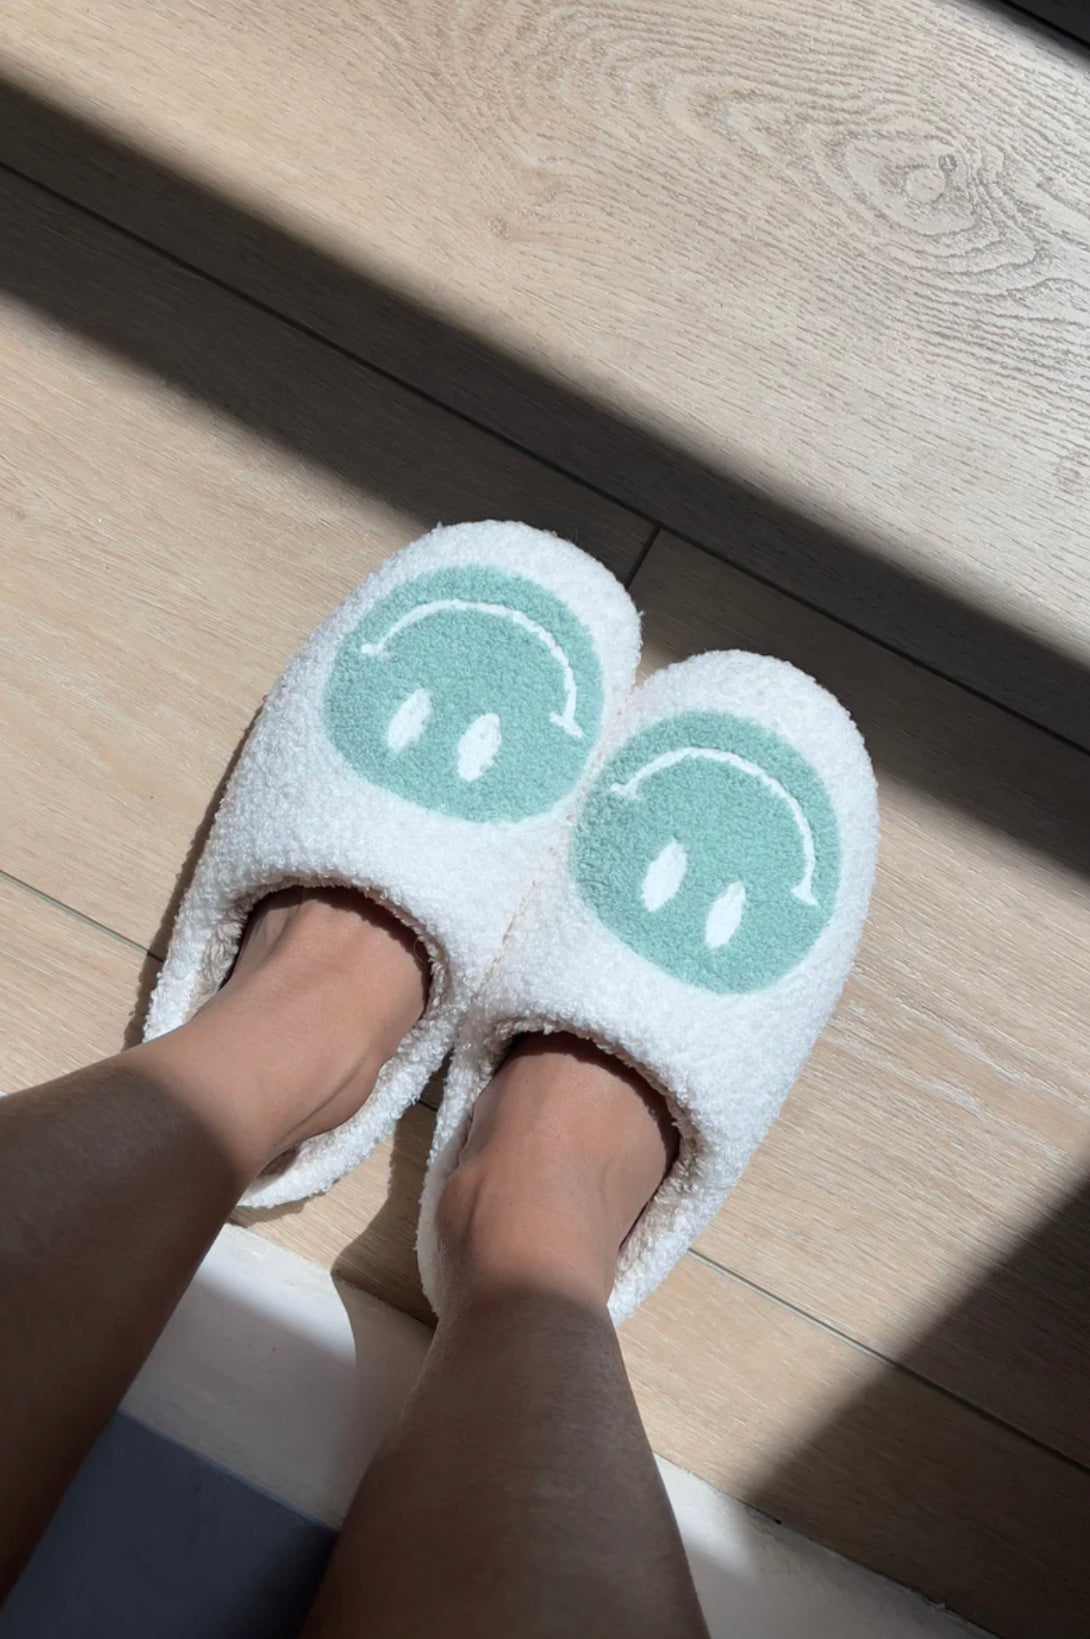 orangey smiley face slippers